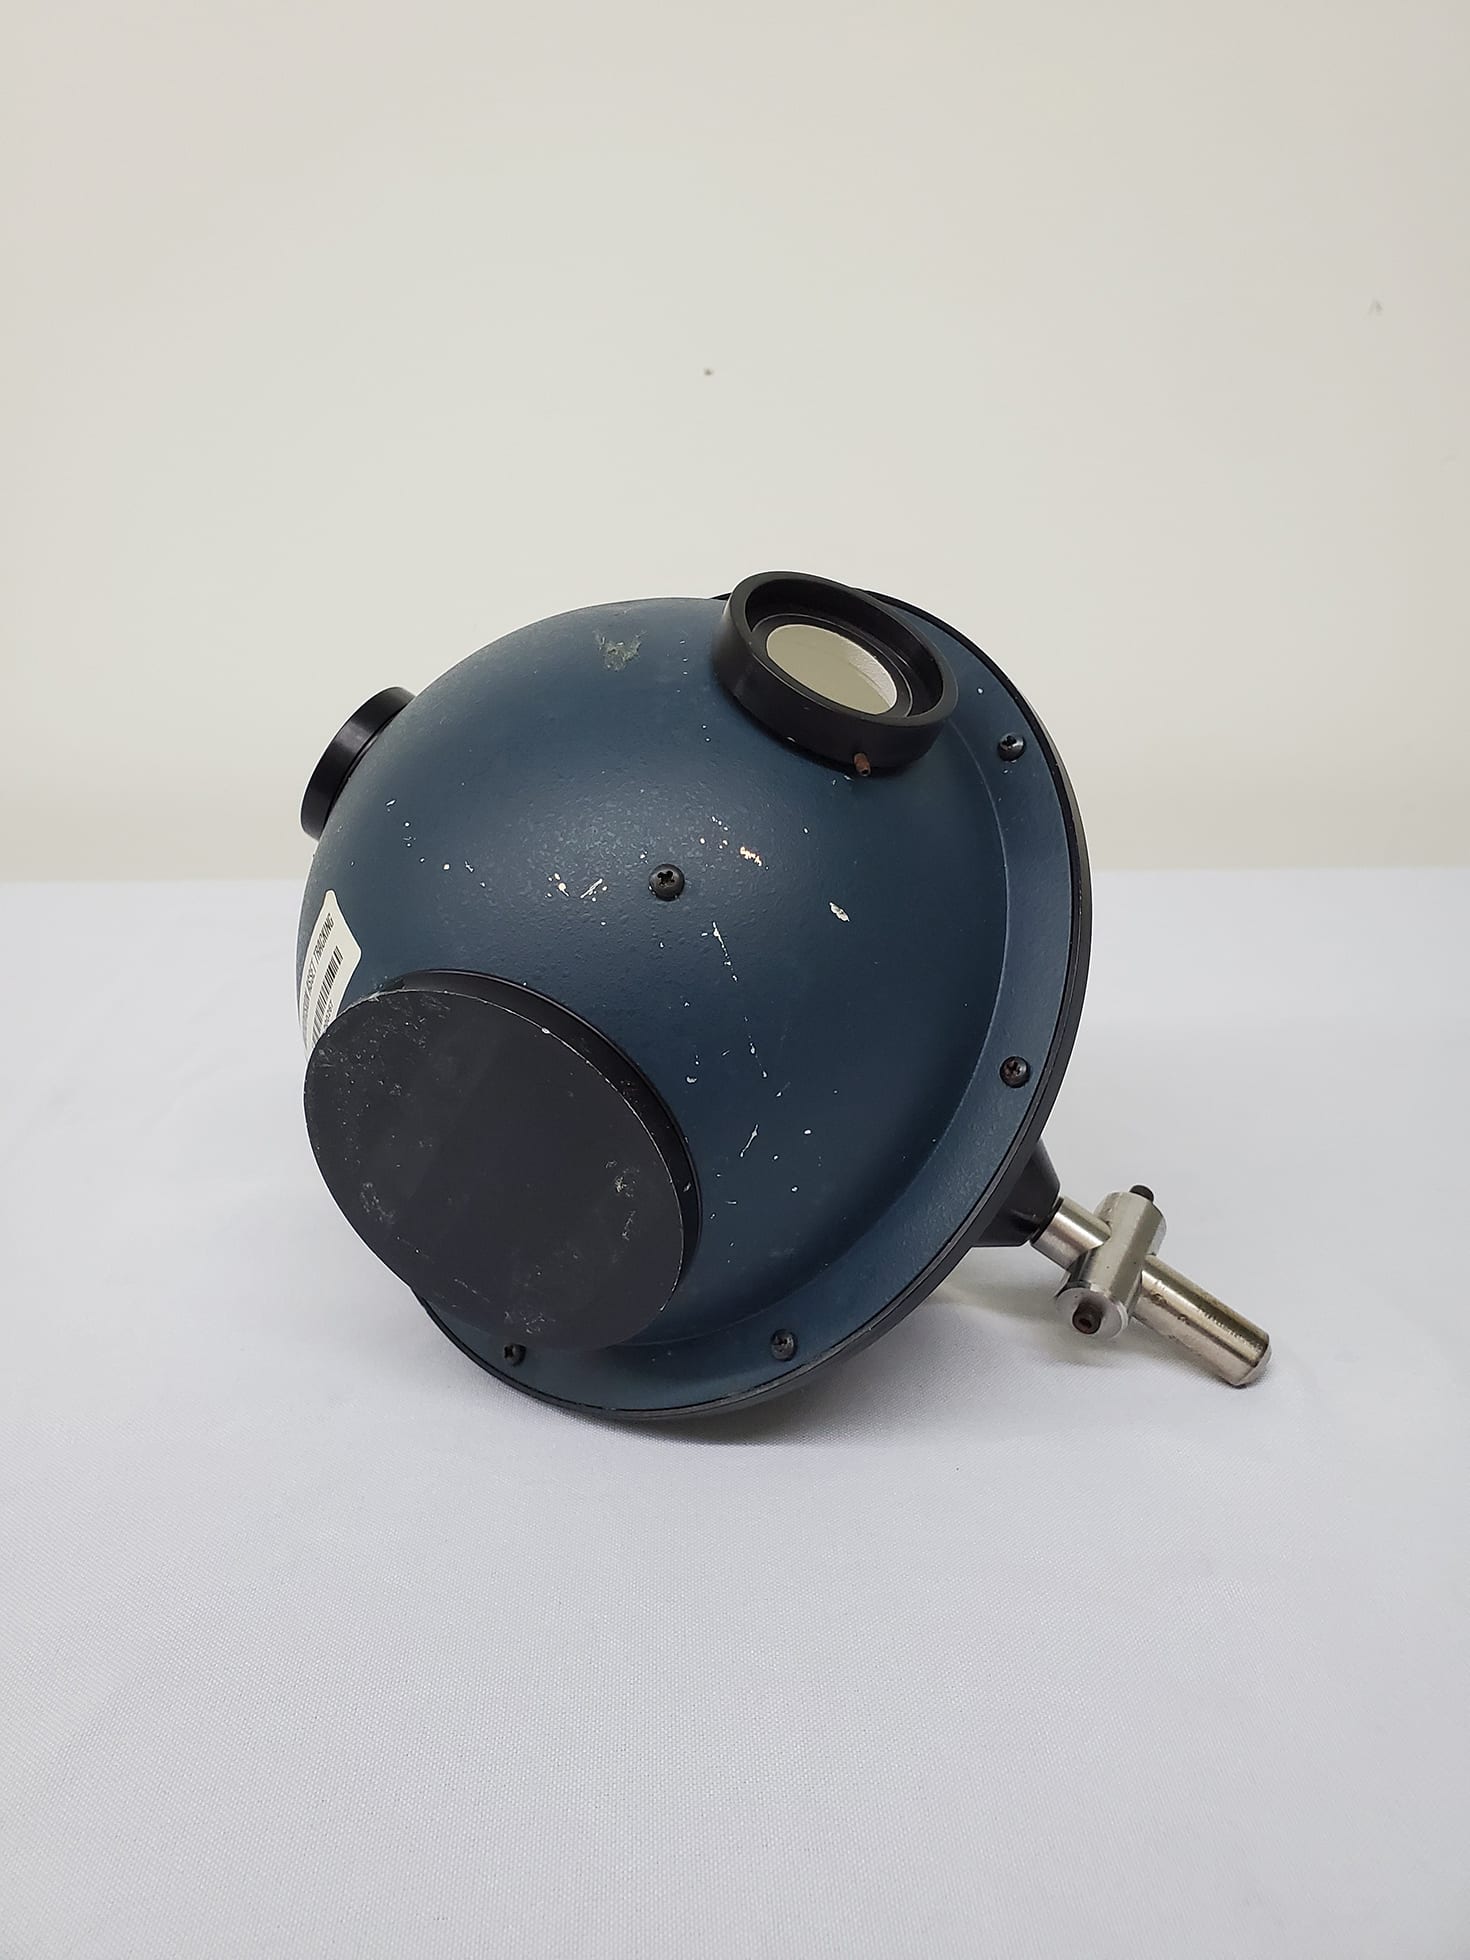 Newport-819 C-Spectralon Collimated Beam Integrating Sphere-57488 For Sale